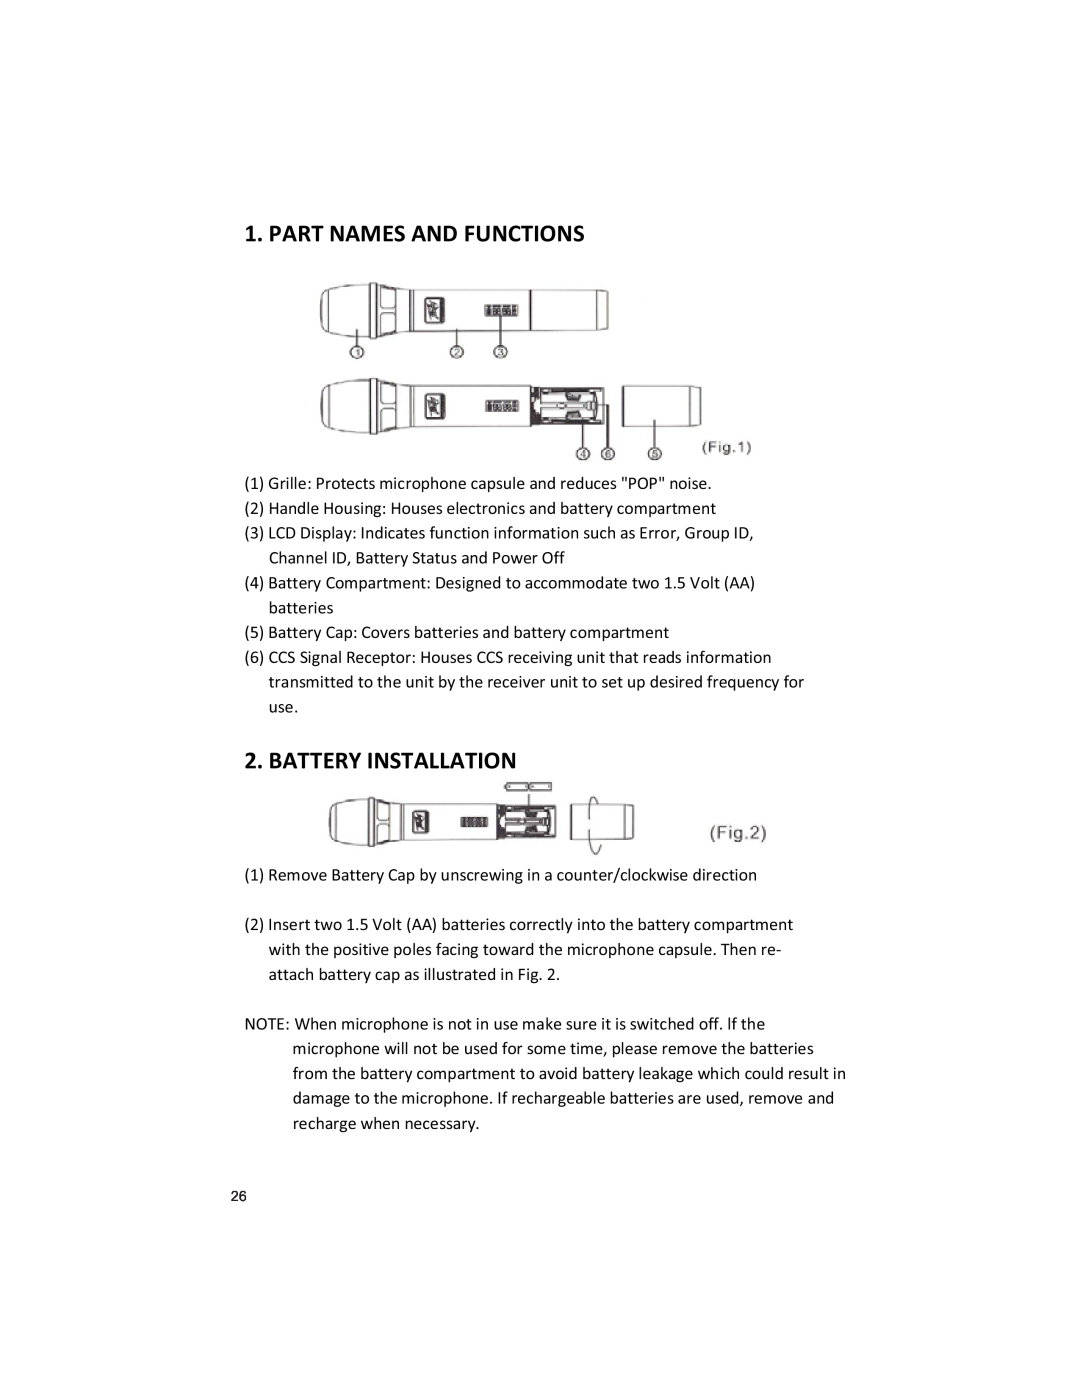 Peavey U1002 manual Part Names And Functions, Battery Installation 